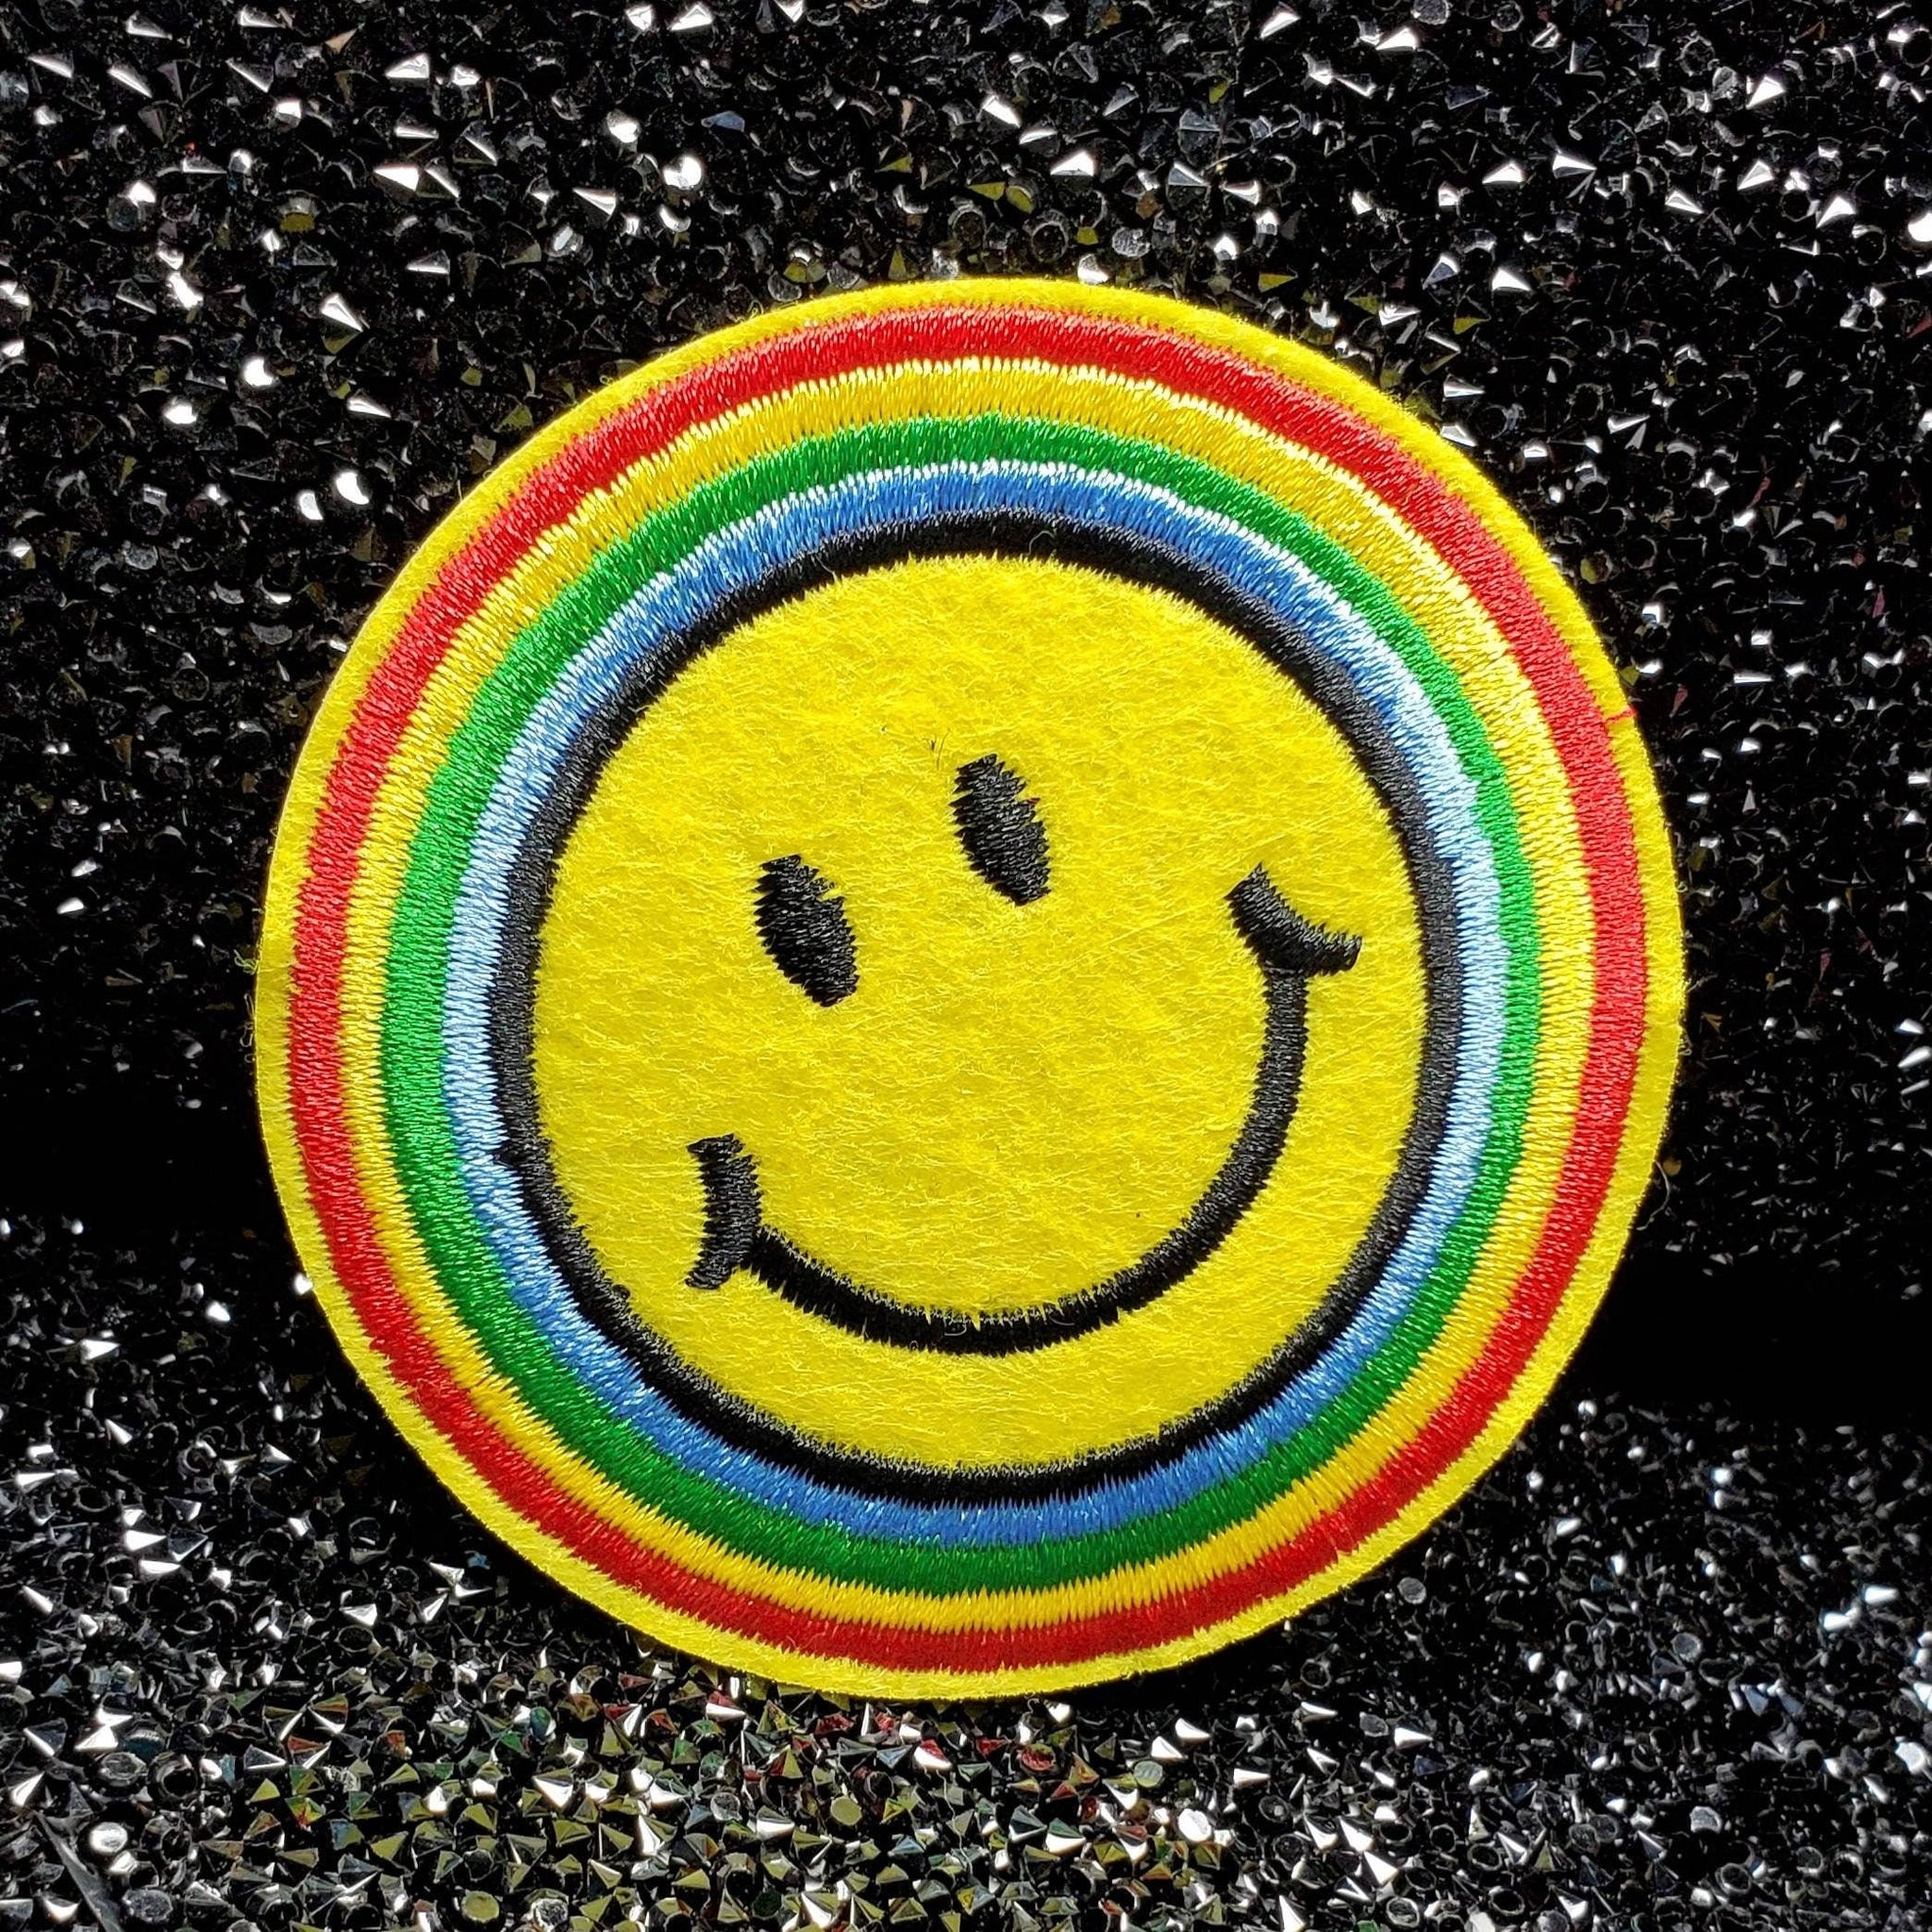 Super Happy "Colorful Face Emoji" Circular Patch, Embroidered Iron On Patch, Fashion Patch for Clothing, 3-inch x 3-inch badge